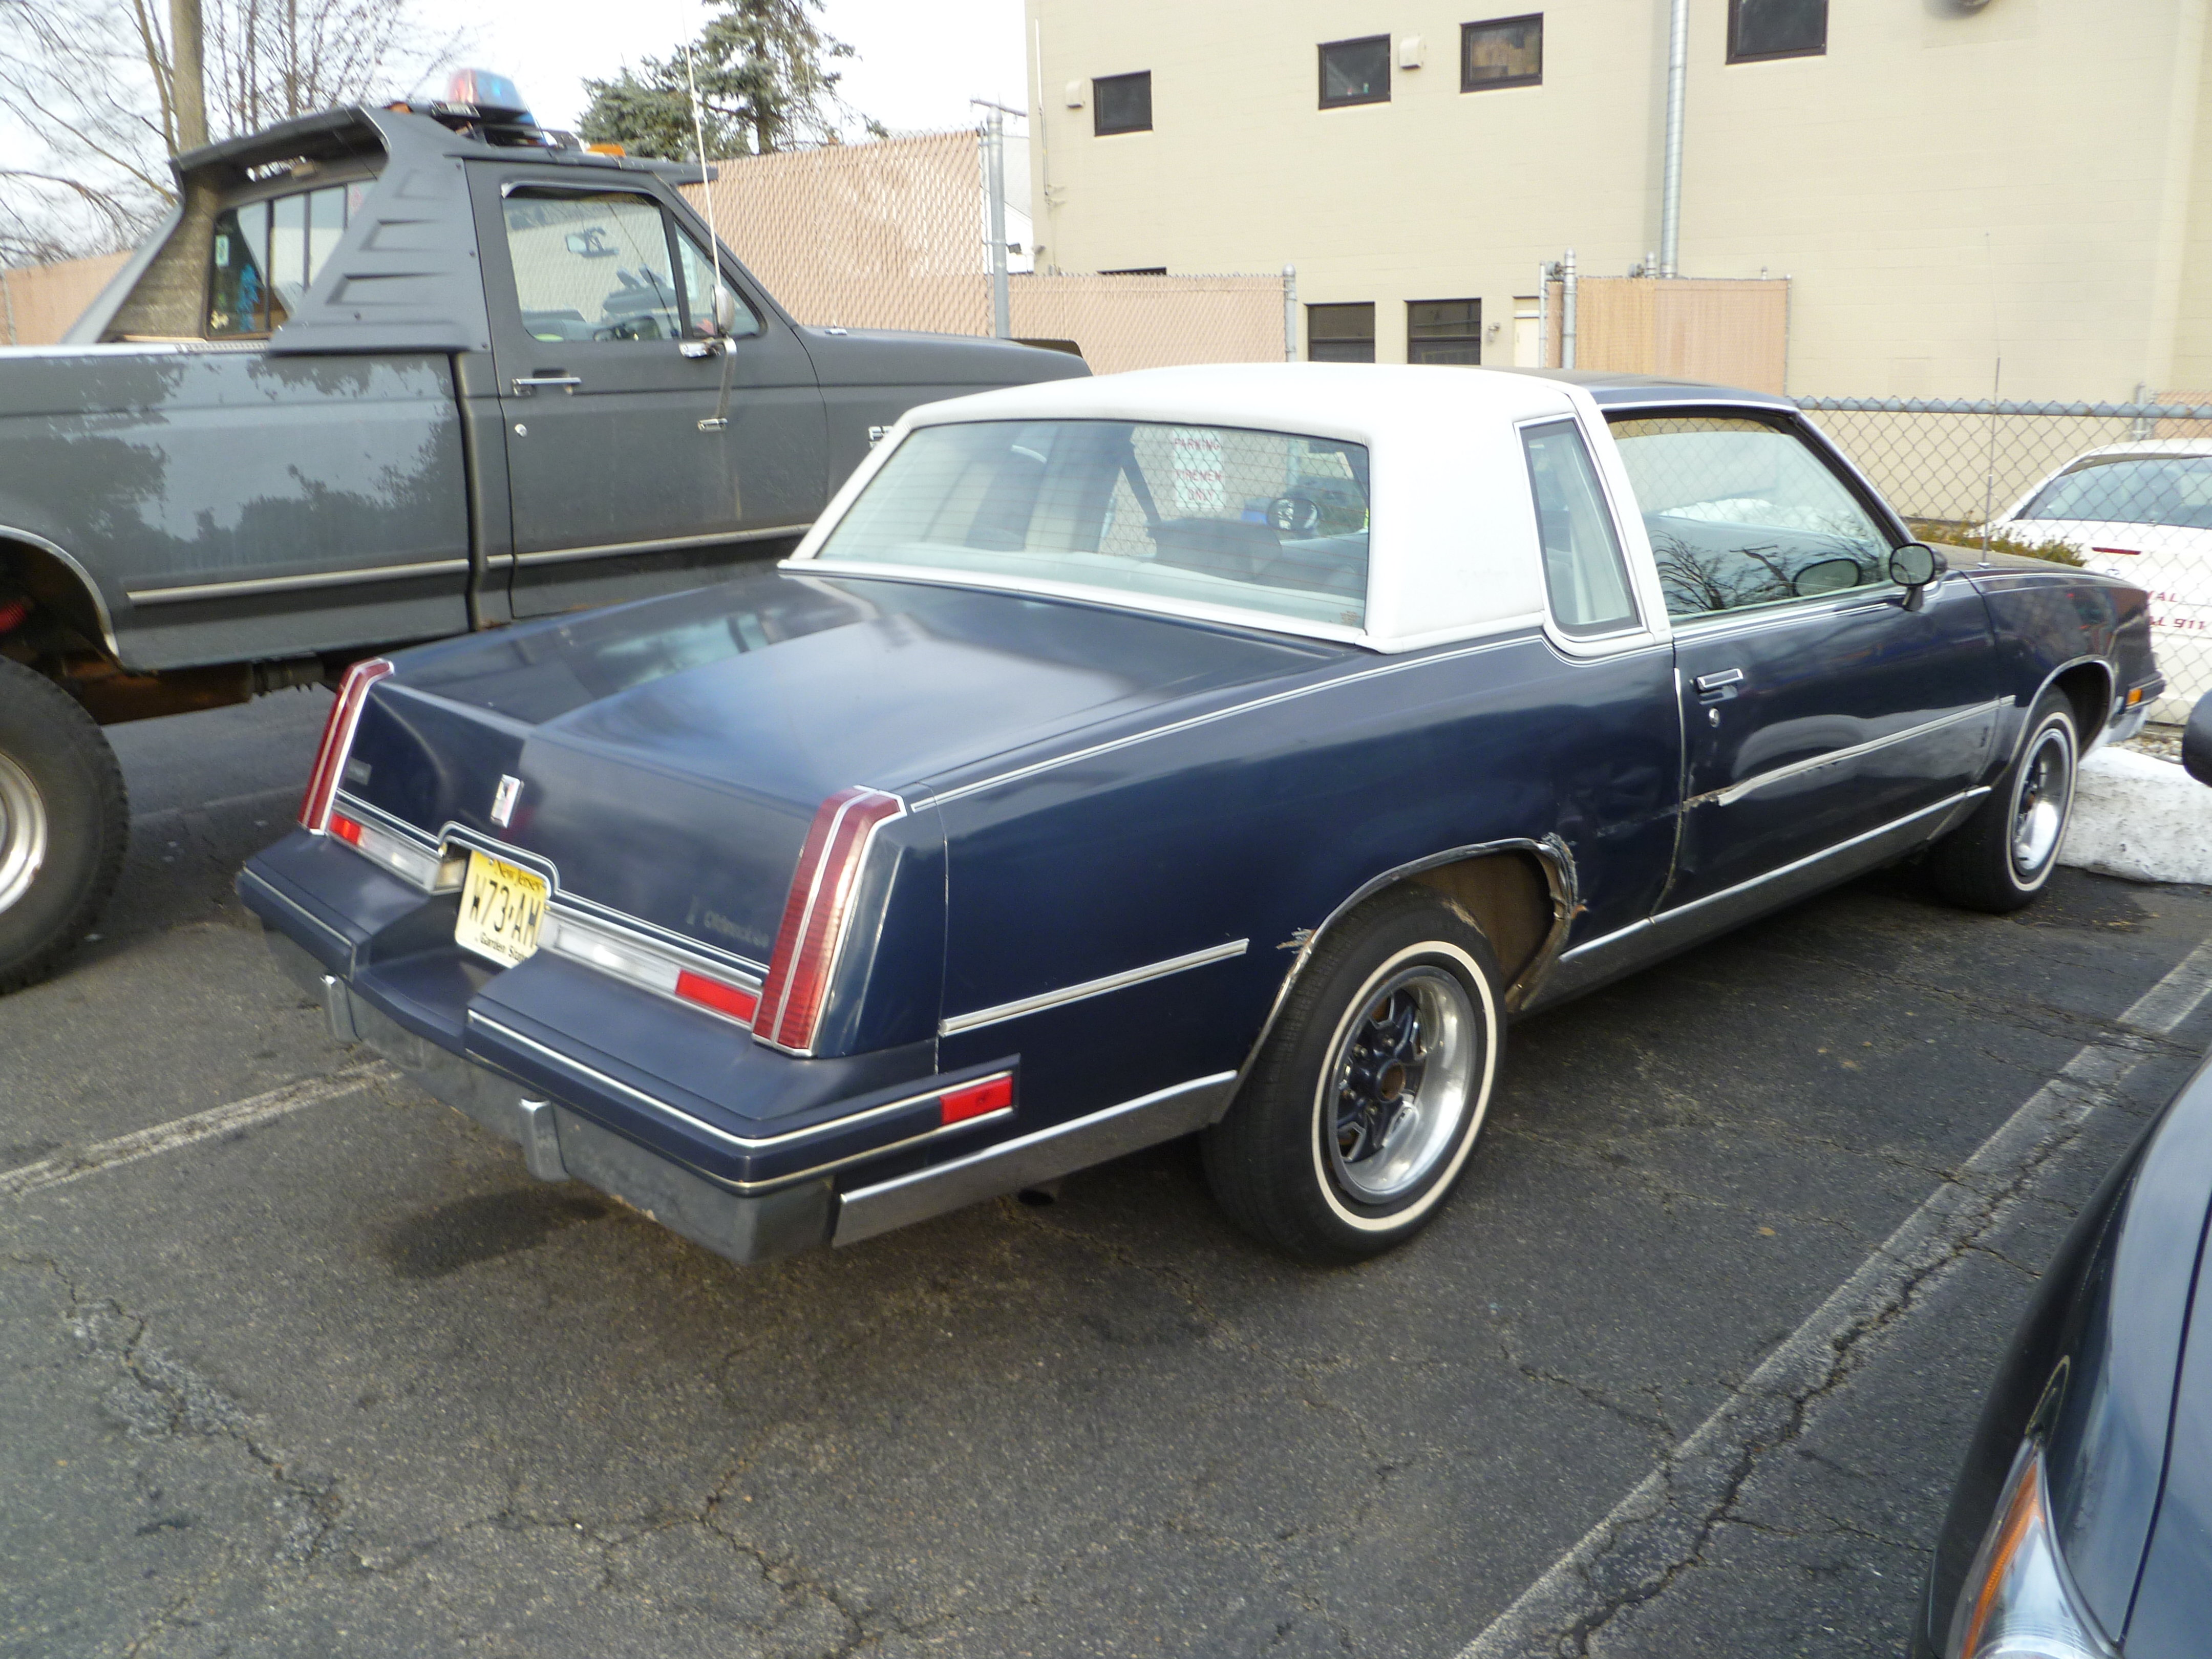 1983 Oldsmobile Cutlass Supreme Coupe | Flickr - Photo Sharing!